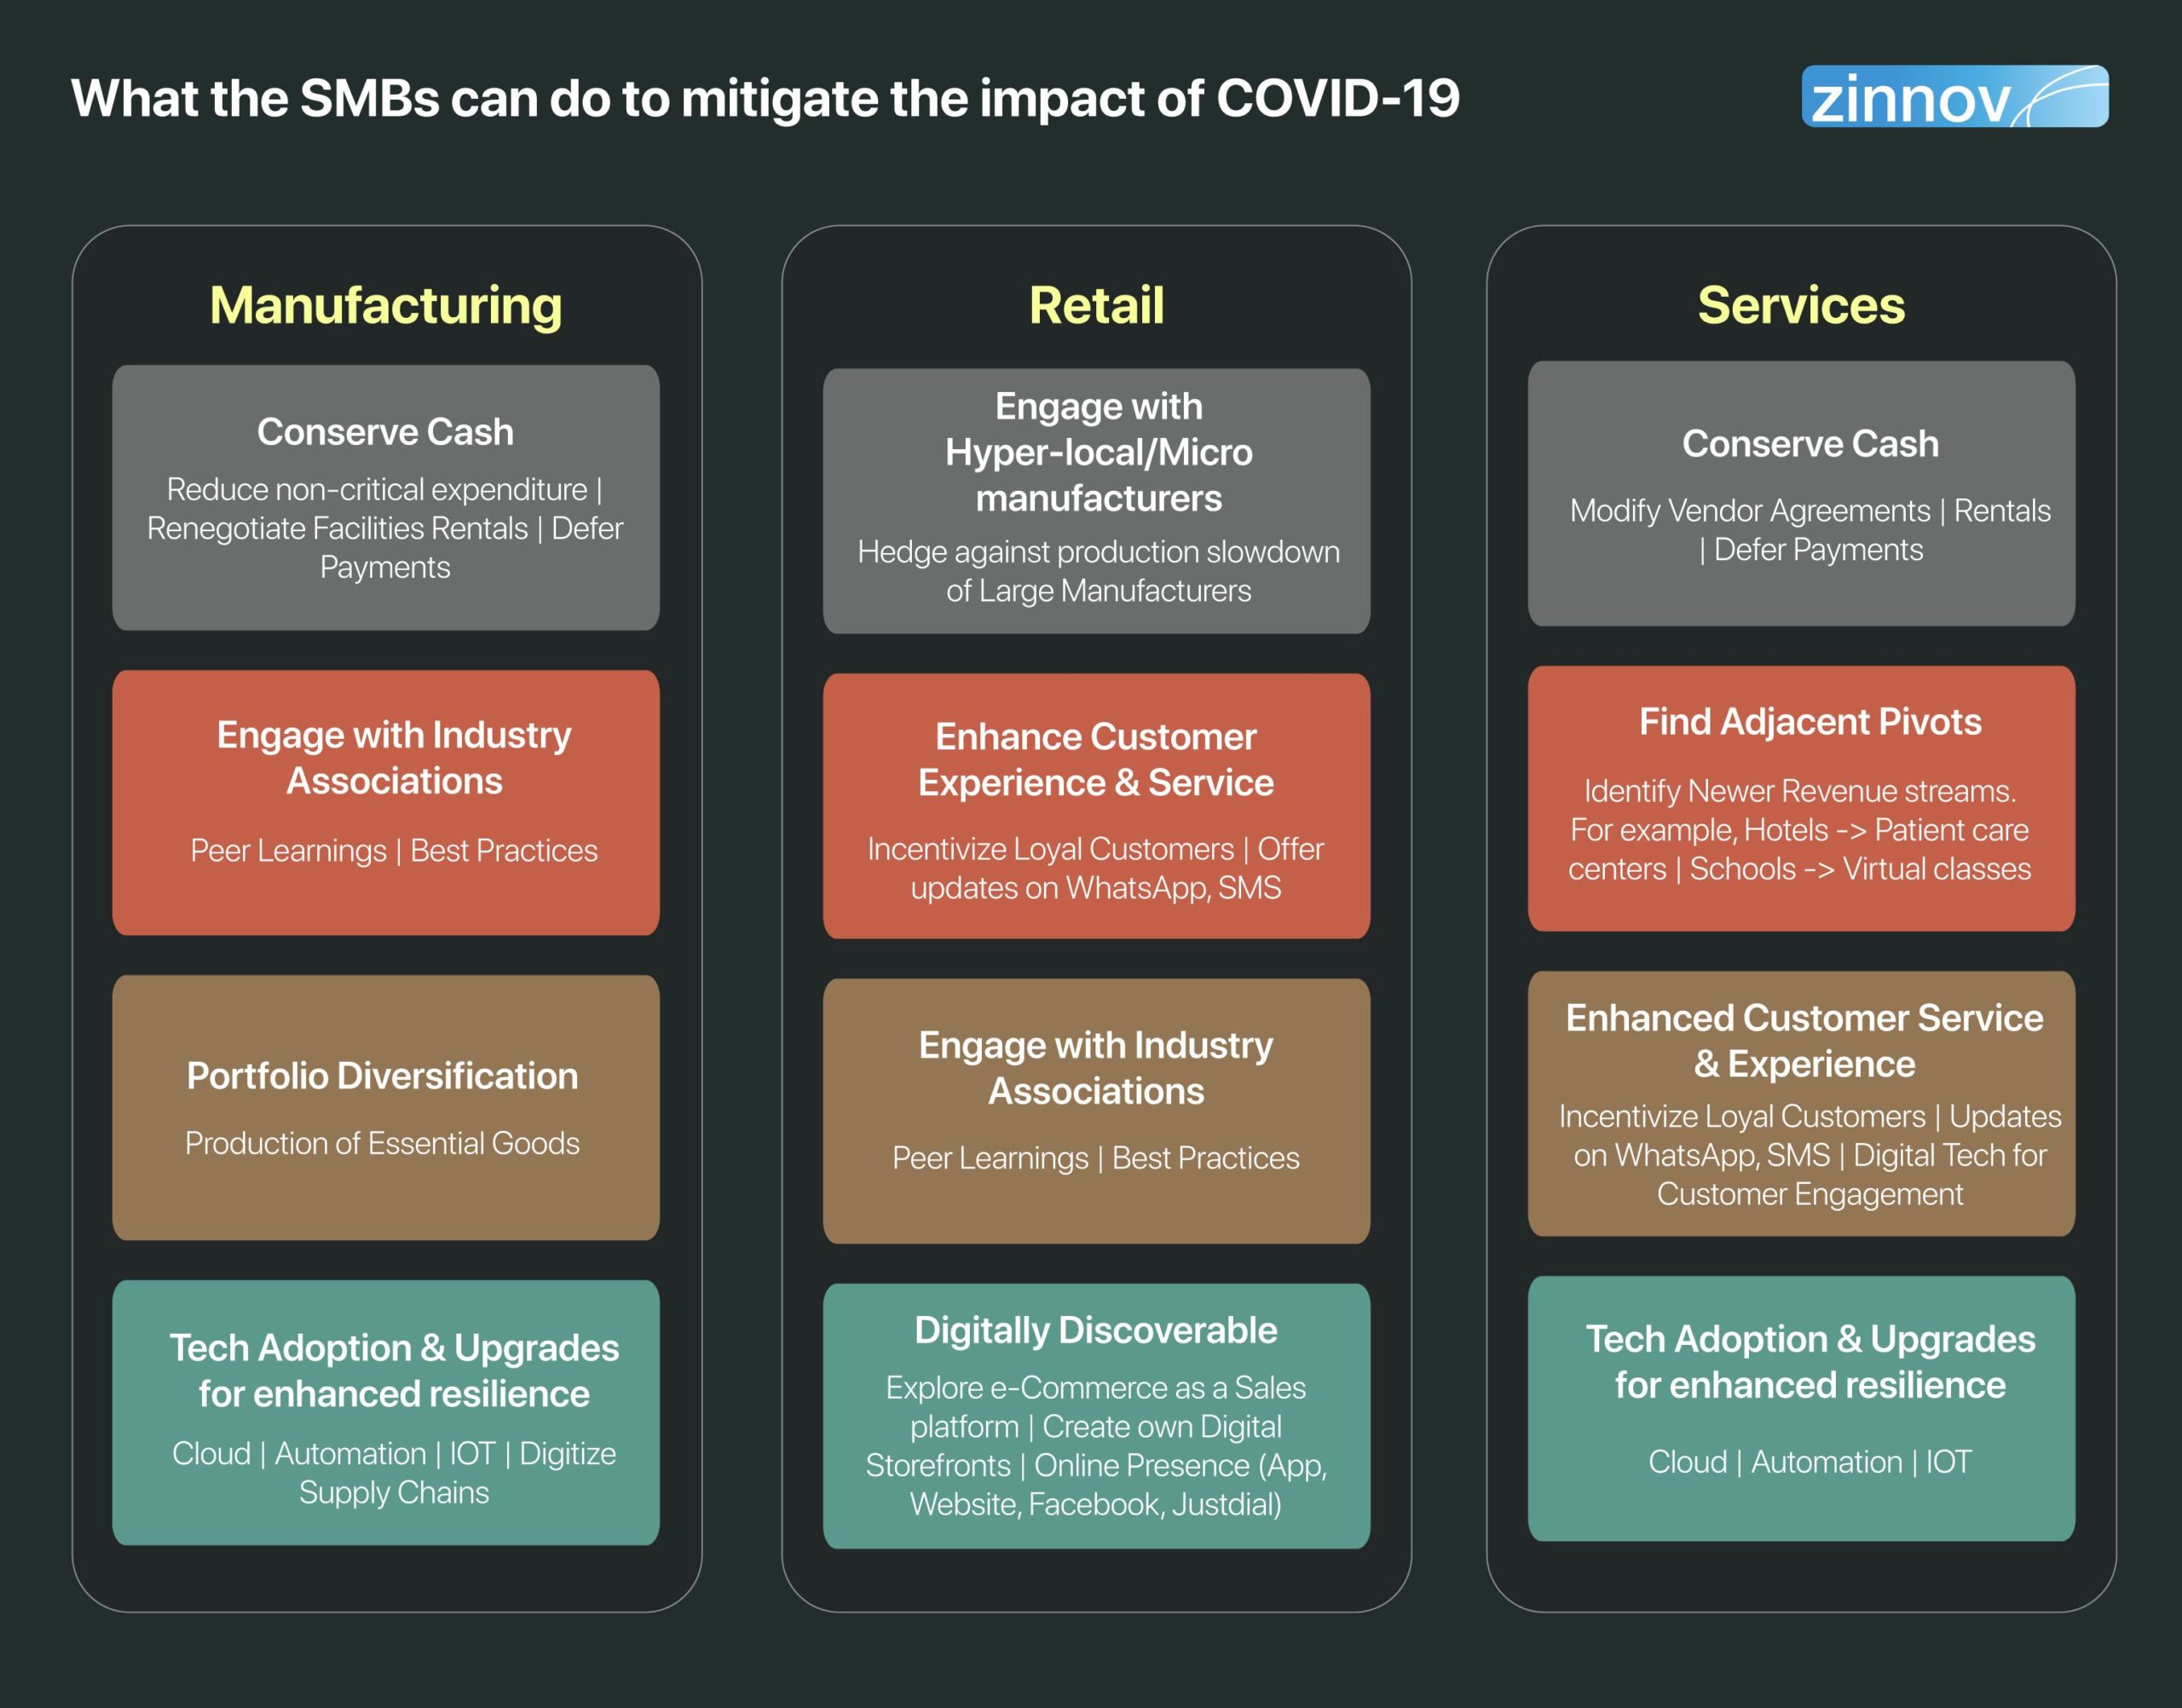 What the SMBs can do to mitigate the impact of COVID-19